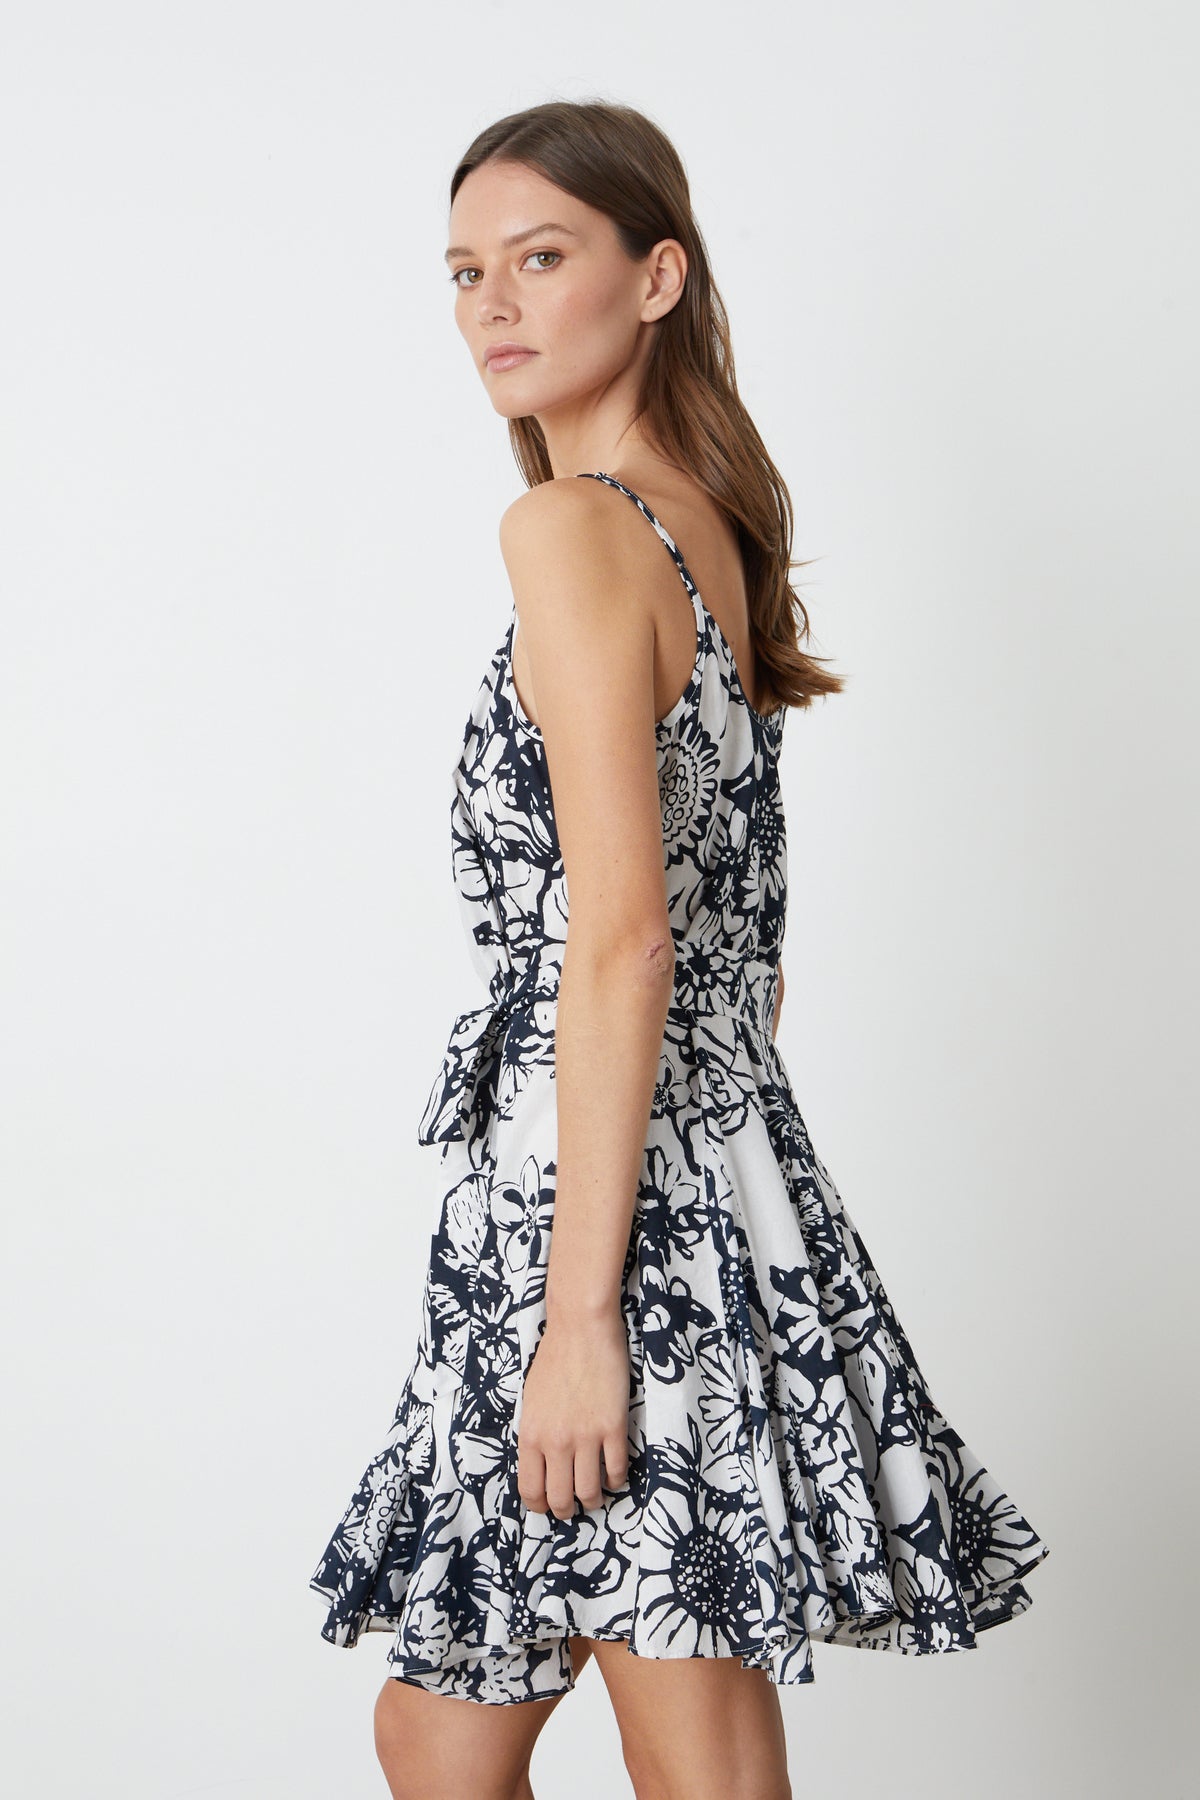 The model is wearing a VIVIAN PRINTED DRESS by Velvet by Graham & Spencer.-26774913286337